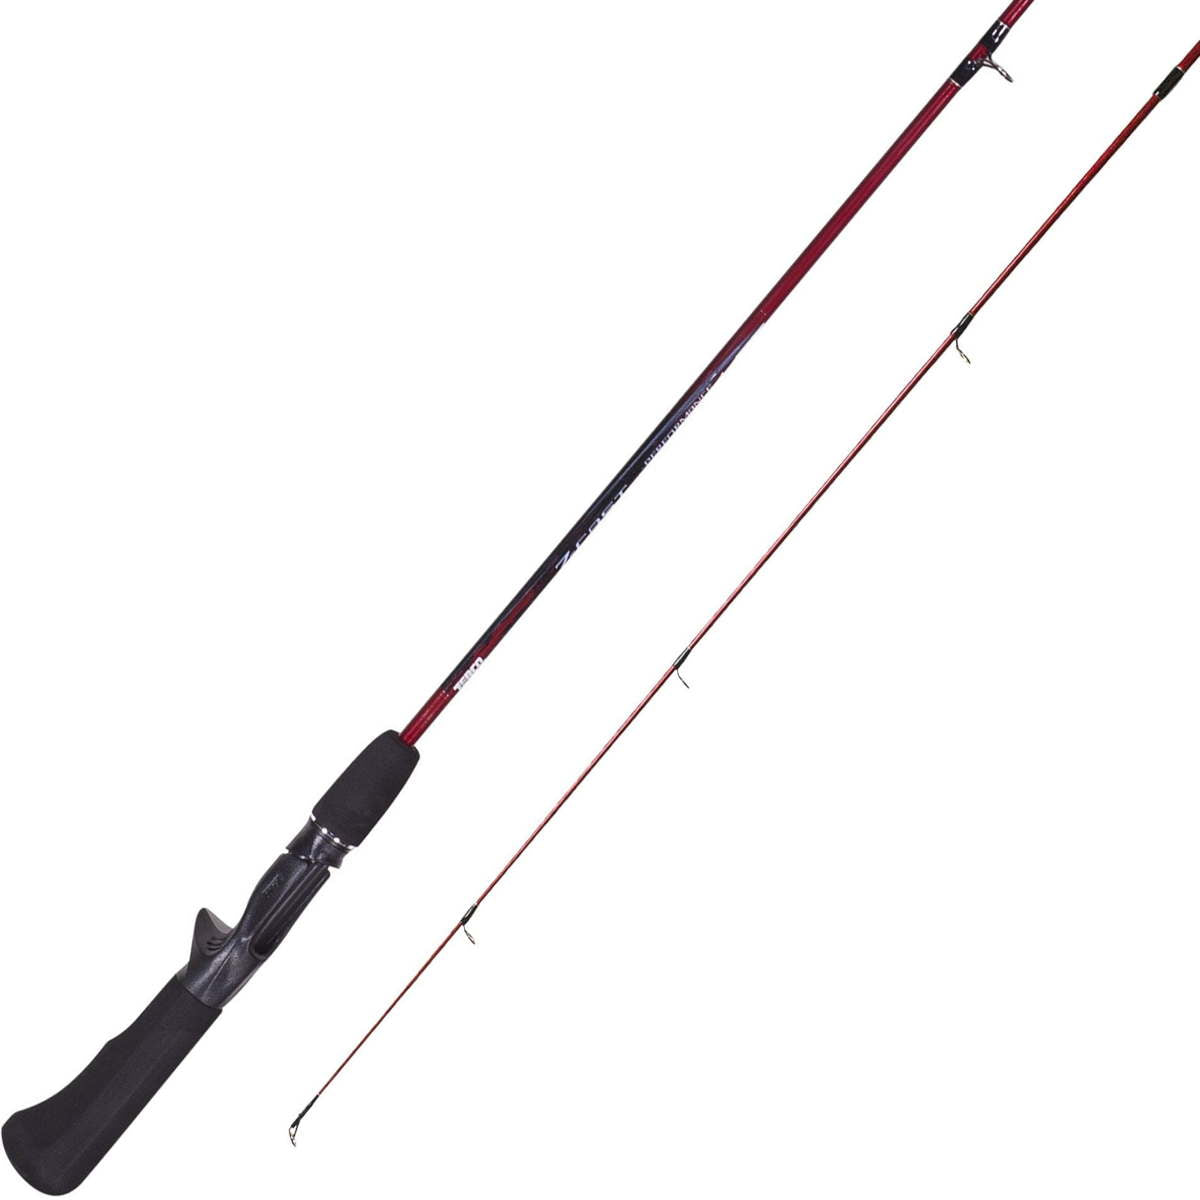 Photo of Zebco Z-Cast Series Pistol Grip Casting Rod for sale at United Tackle Shops.